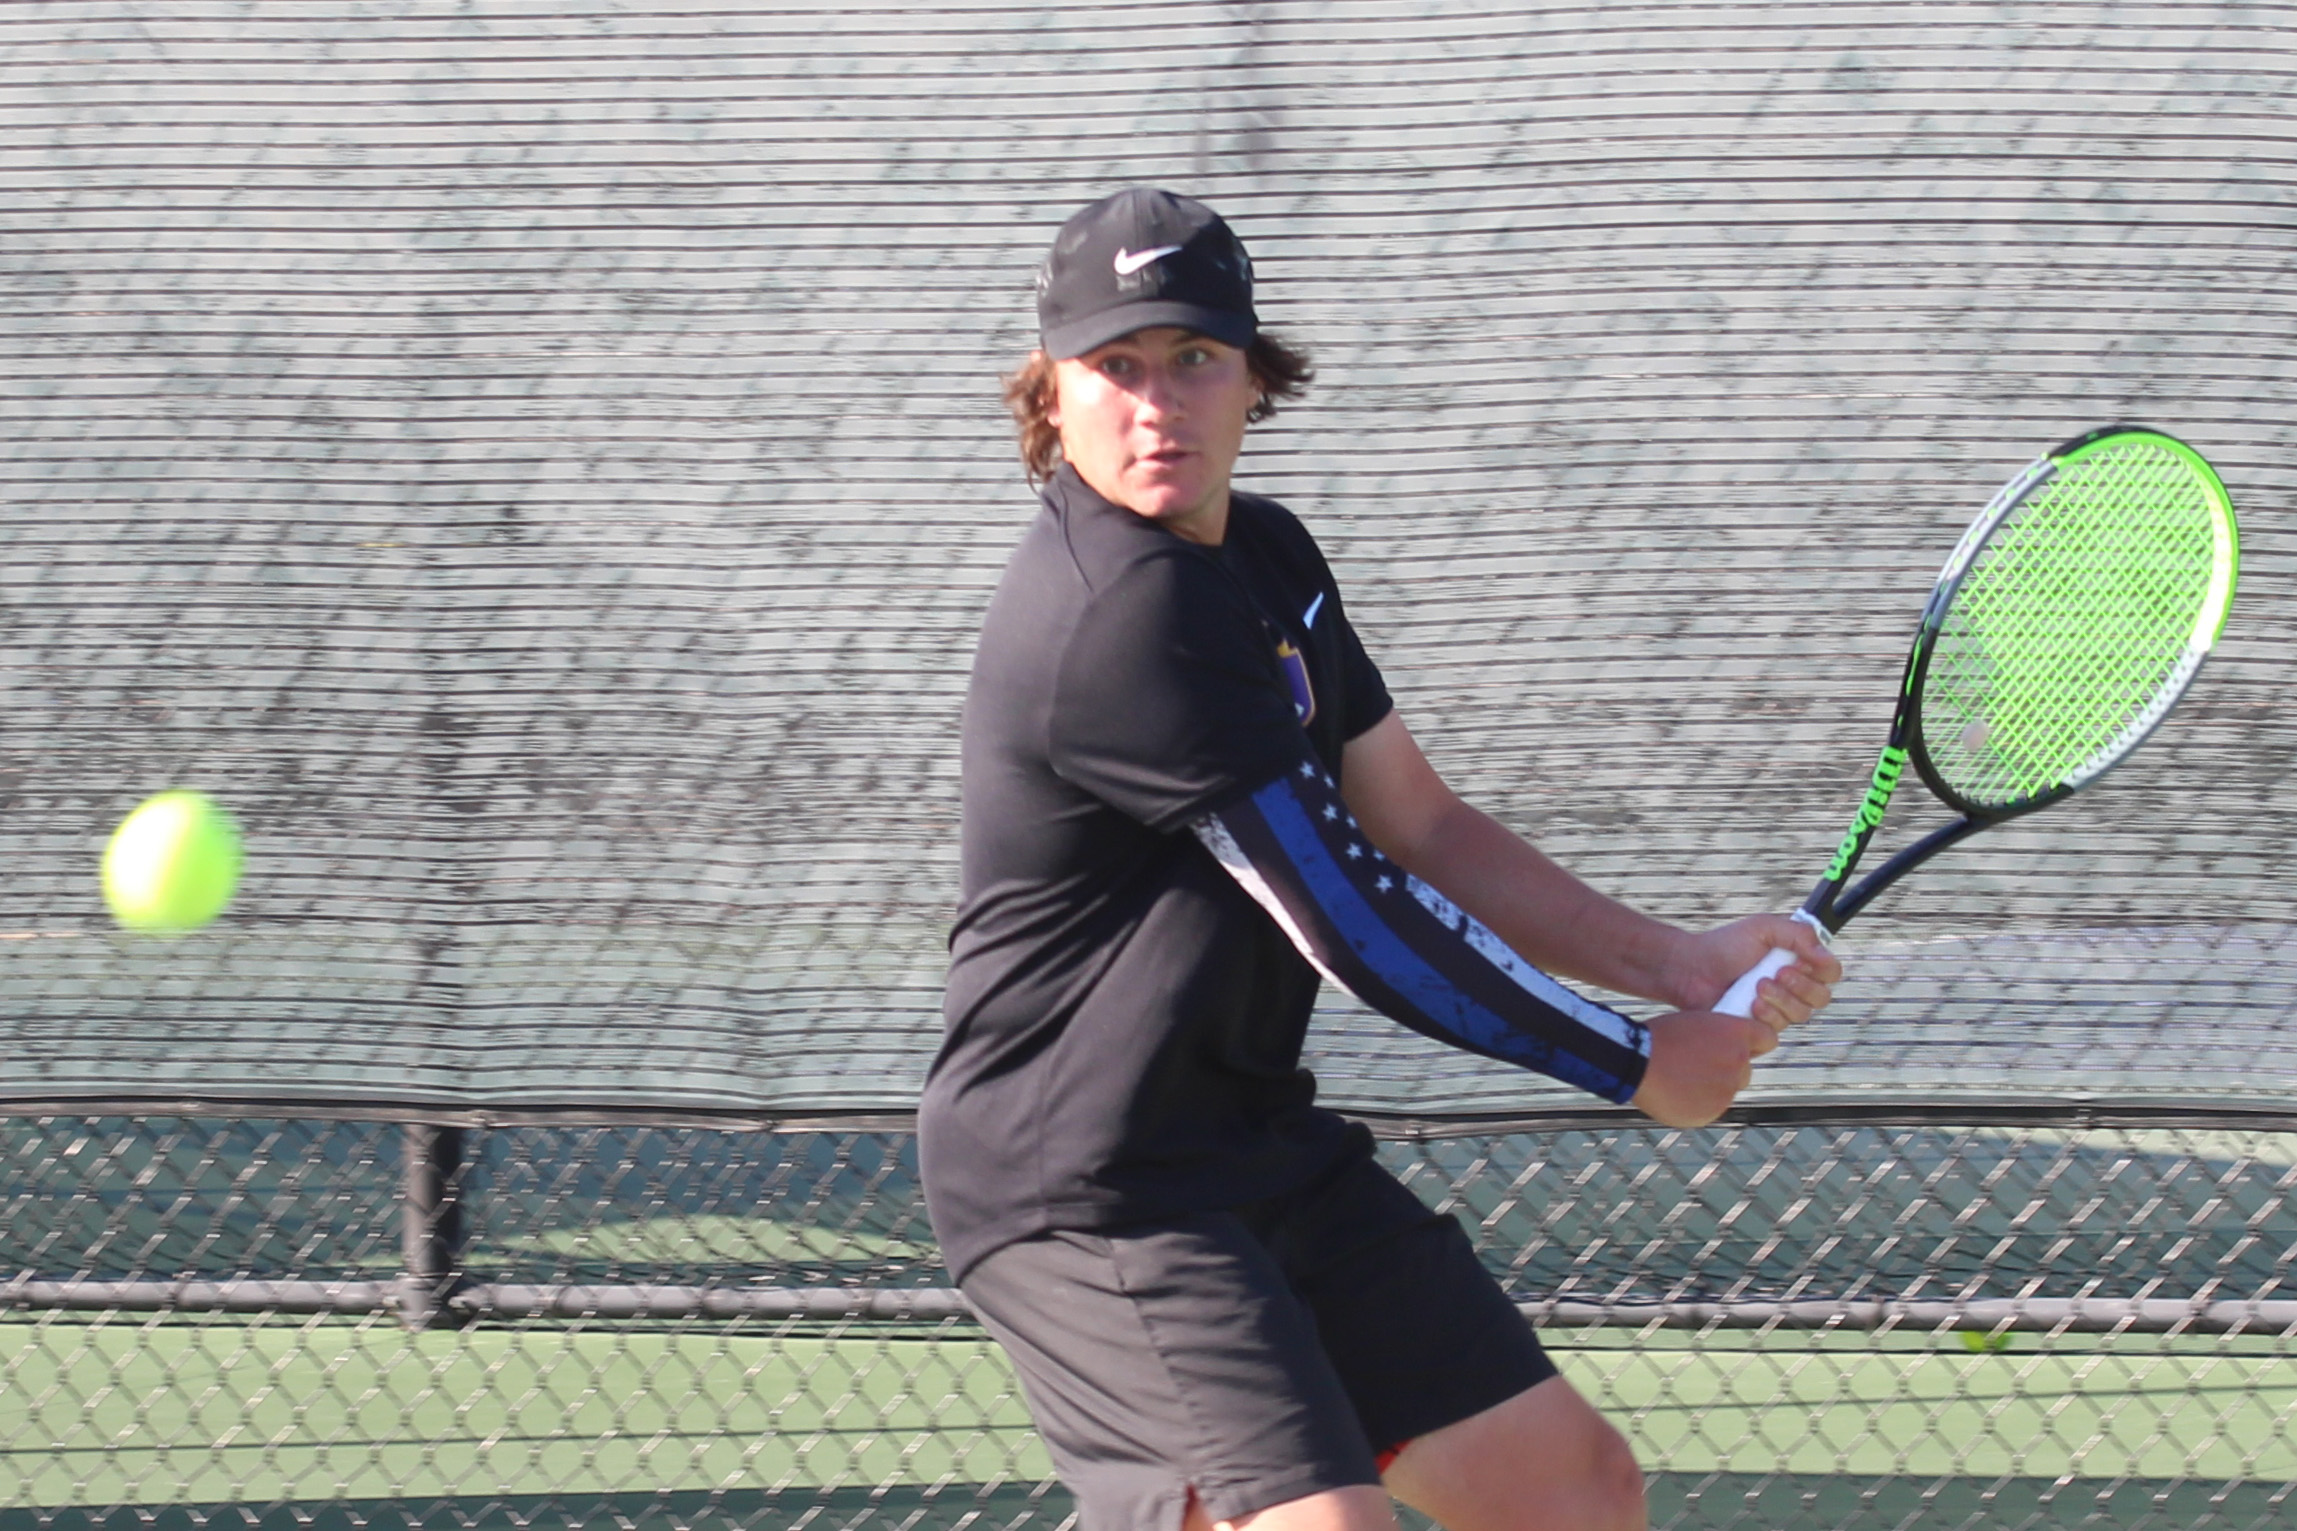 Jacob Bear claimed the No. 5 singles spot, earning his first victory of the season.